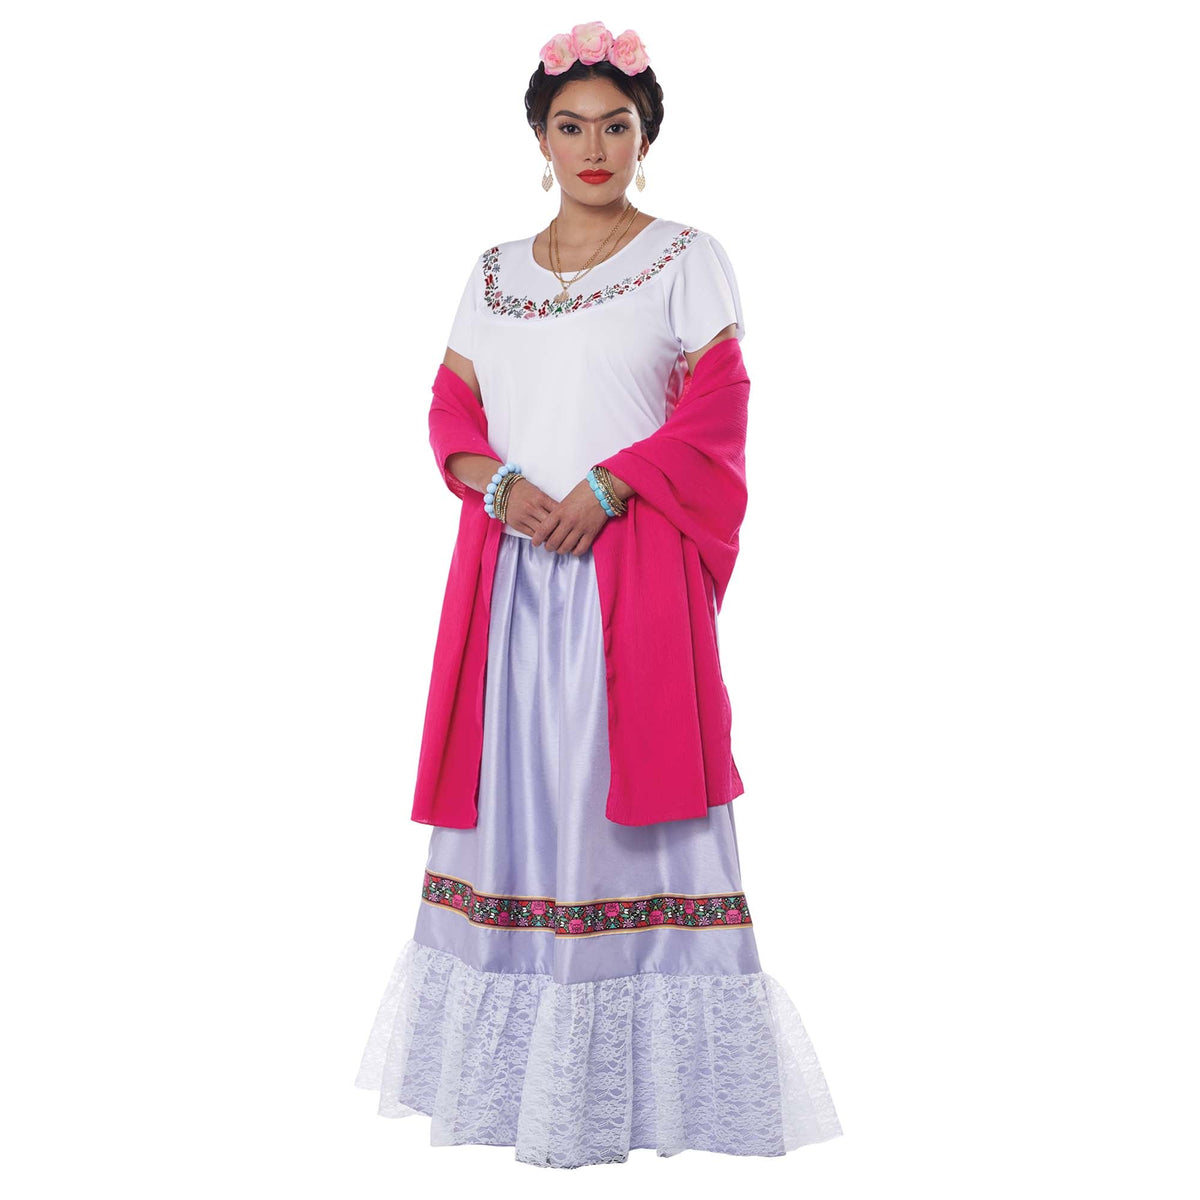 CALIFORNIA COSTUMES Costumes Mexican Folk Artist Costume for Adults, White Blouse and Purple Skirt